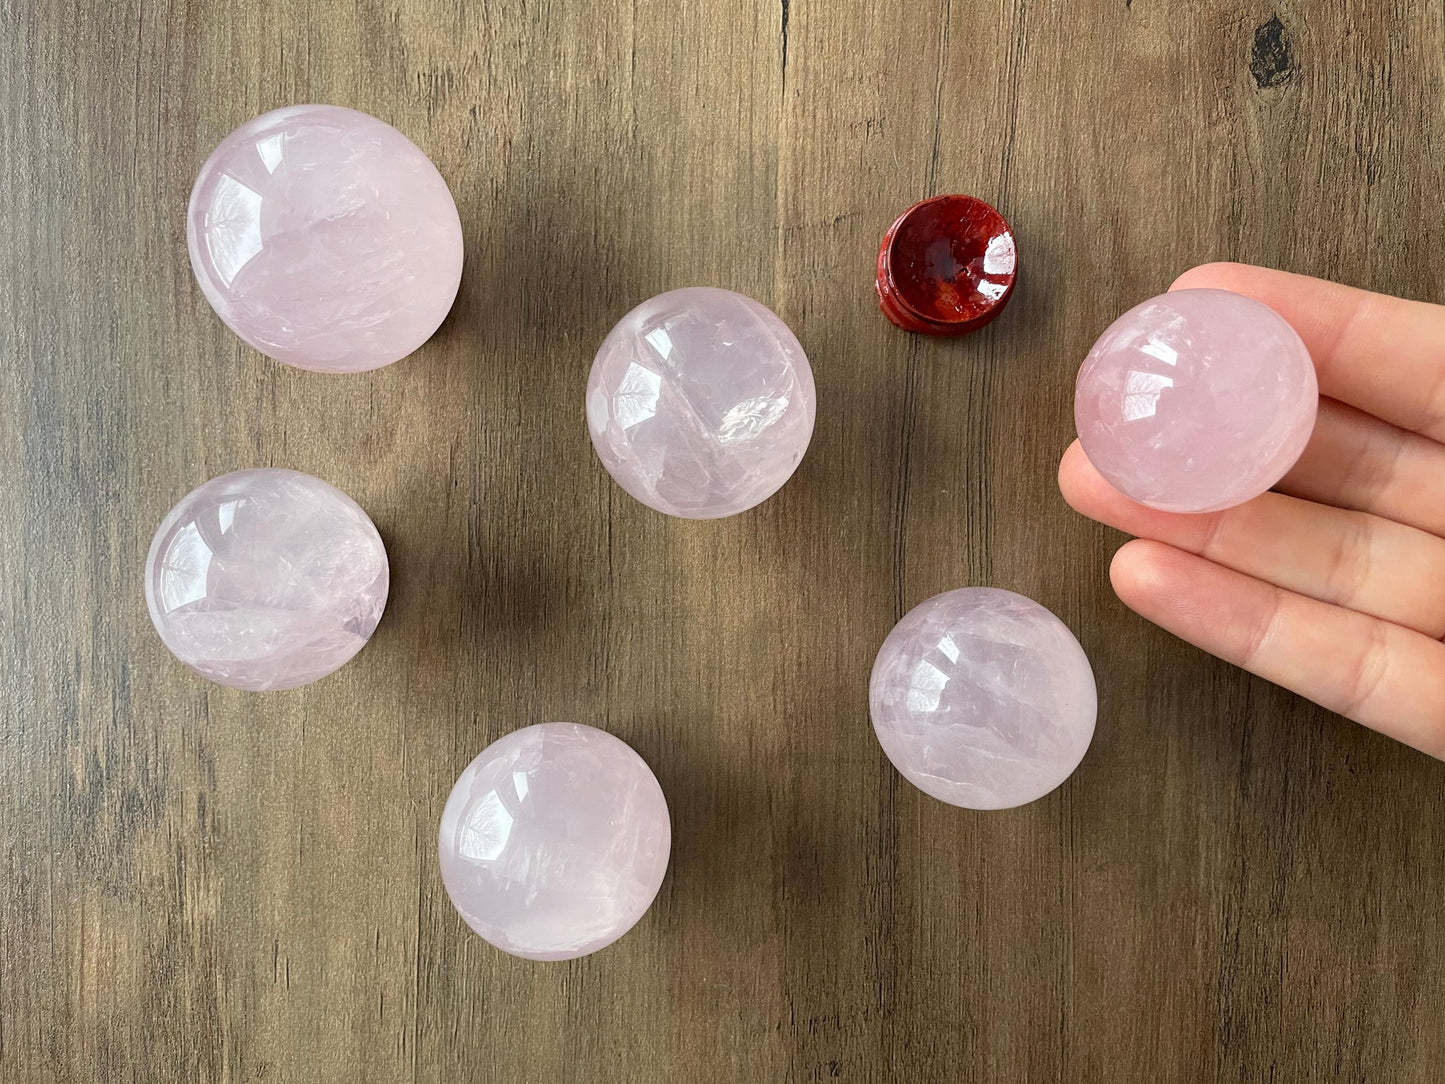 Pictured is a sphere carved out of rose quartz.